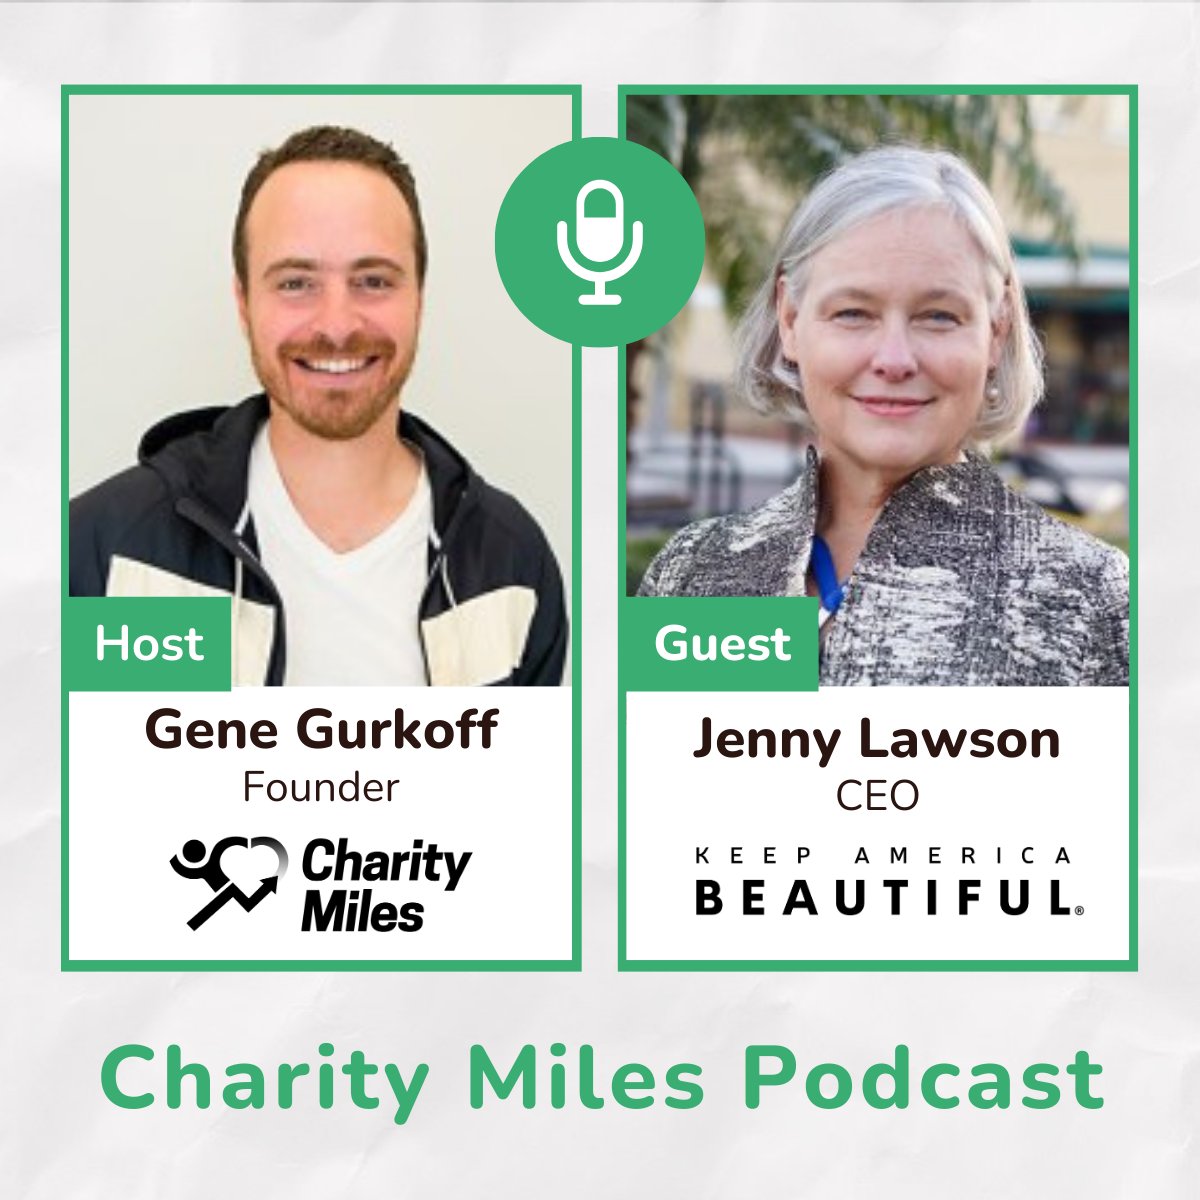 🎙️ Our CEO, Jenny Lawson, was recently featured on the @CharityMiles podcast with founder Gene Gurkoff! They discussed the challenges and solutions around litter, how corporate partnerships can help make an environmental impact & more. Tune in now charitymiles.org/jennylawson/